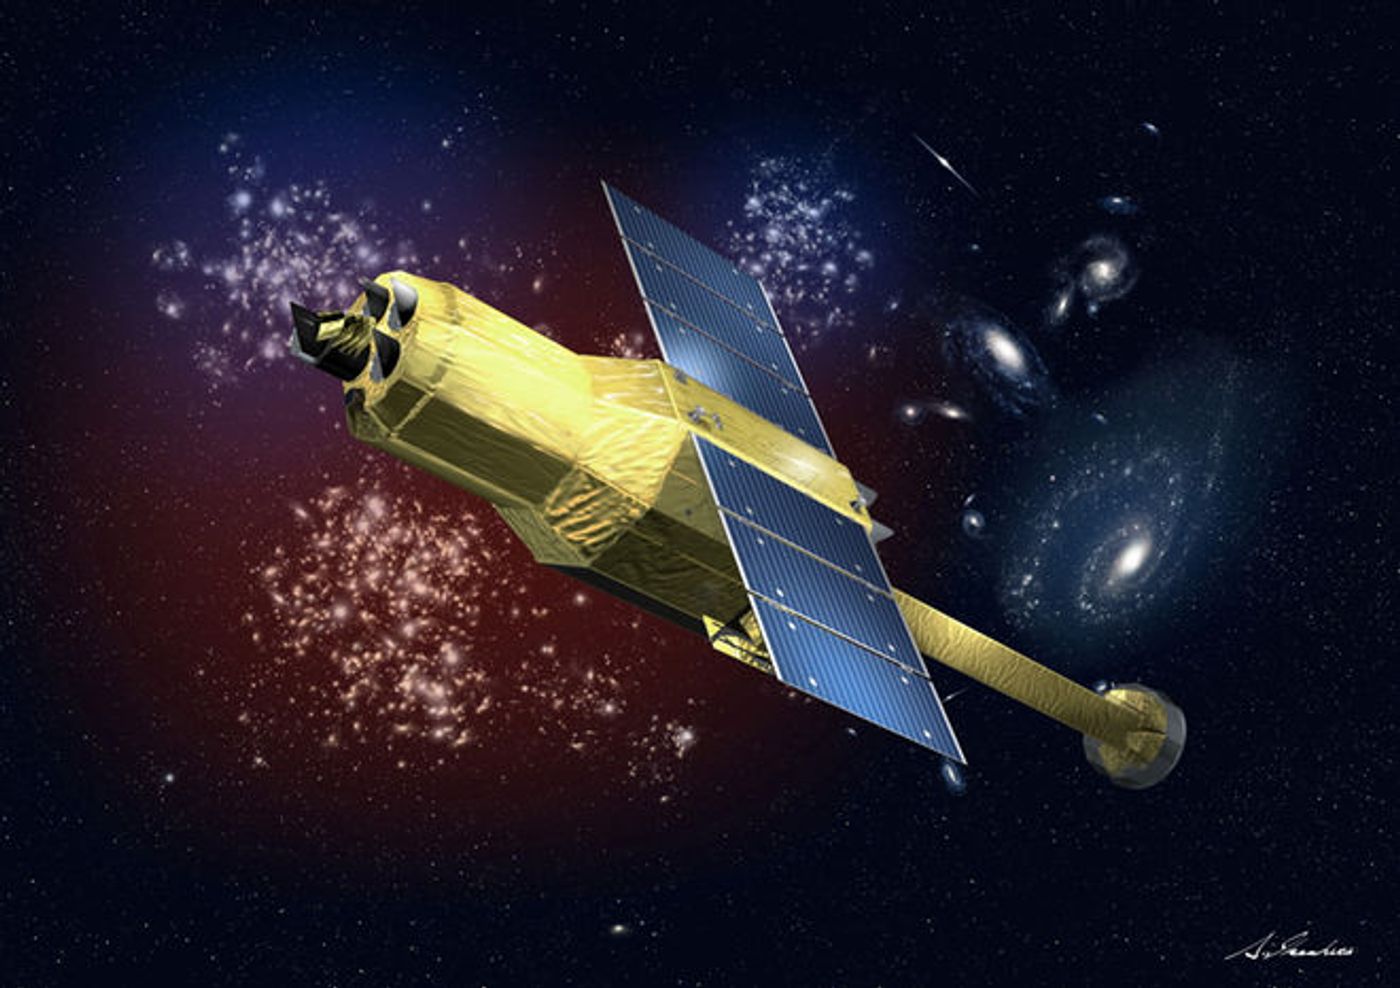 Japan announces it will abandon its communication attempts with the Hitomi satellite.